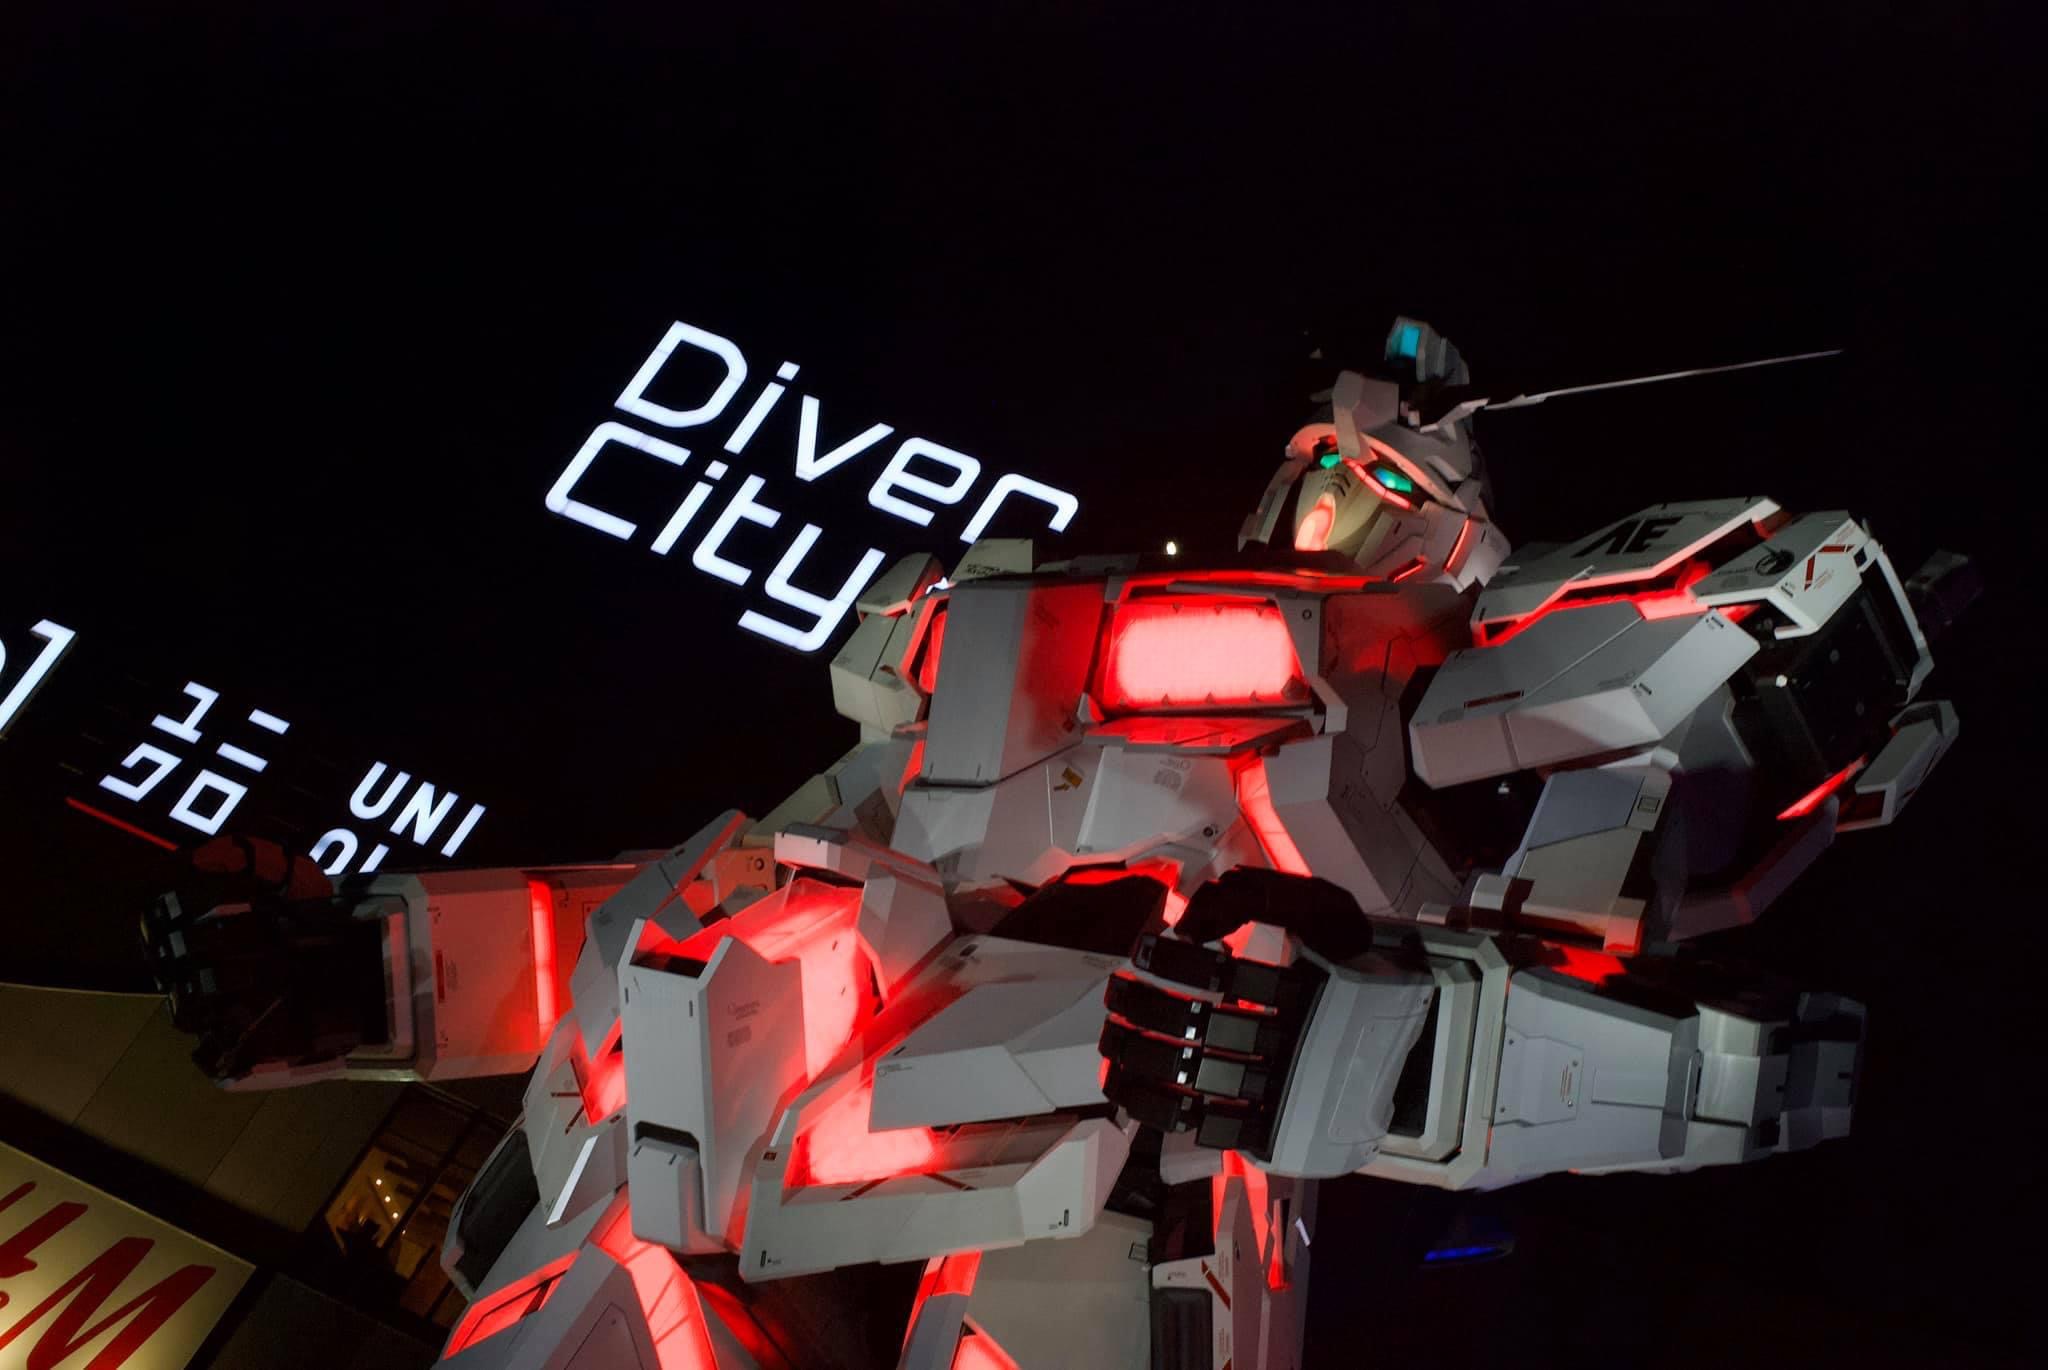 A lifesize gundam glowing red against a black night sky, in the background a neon sign for Diver City